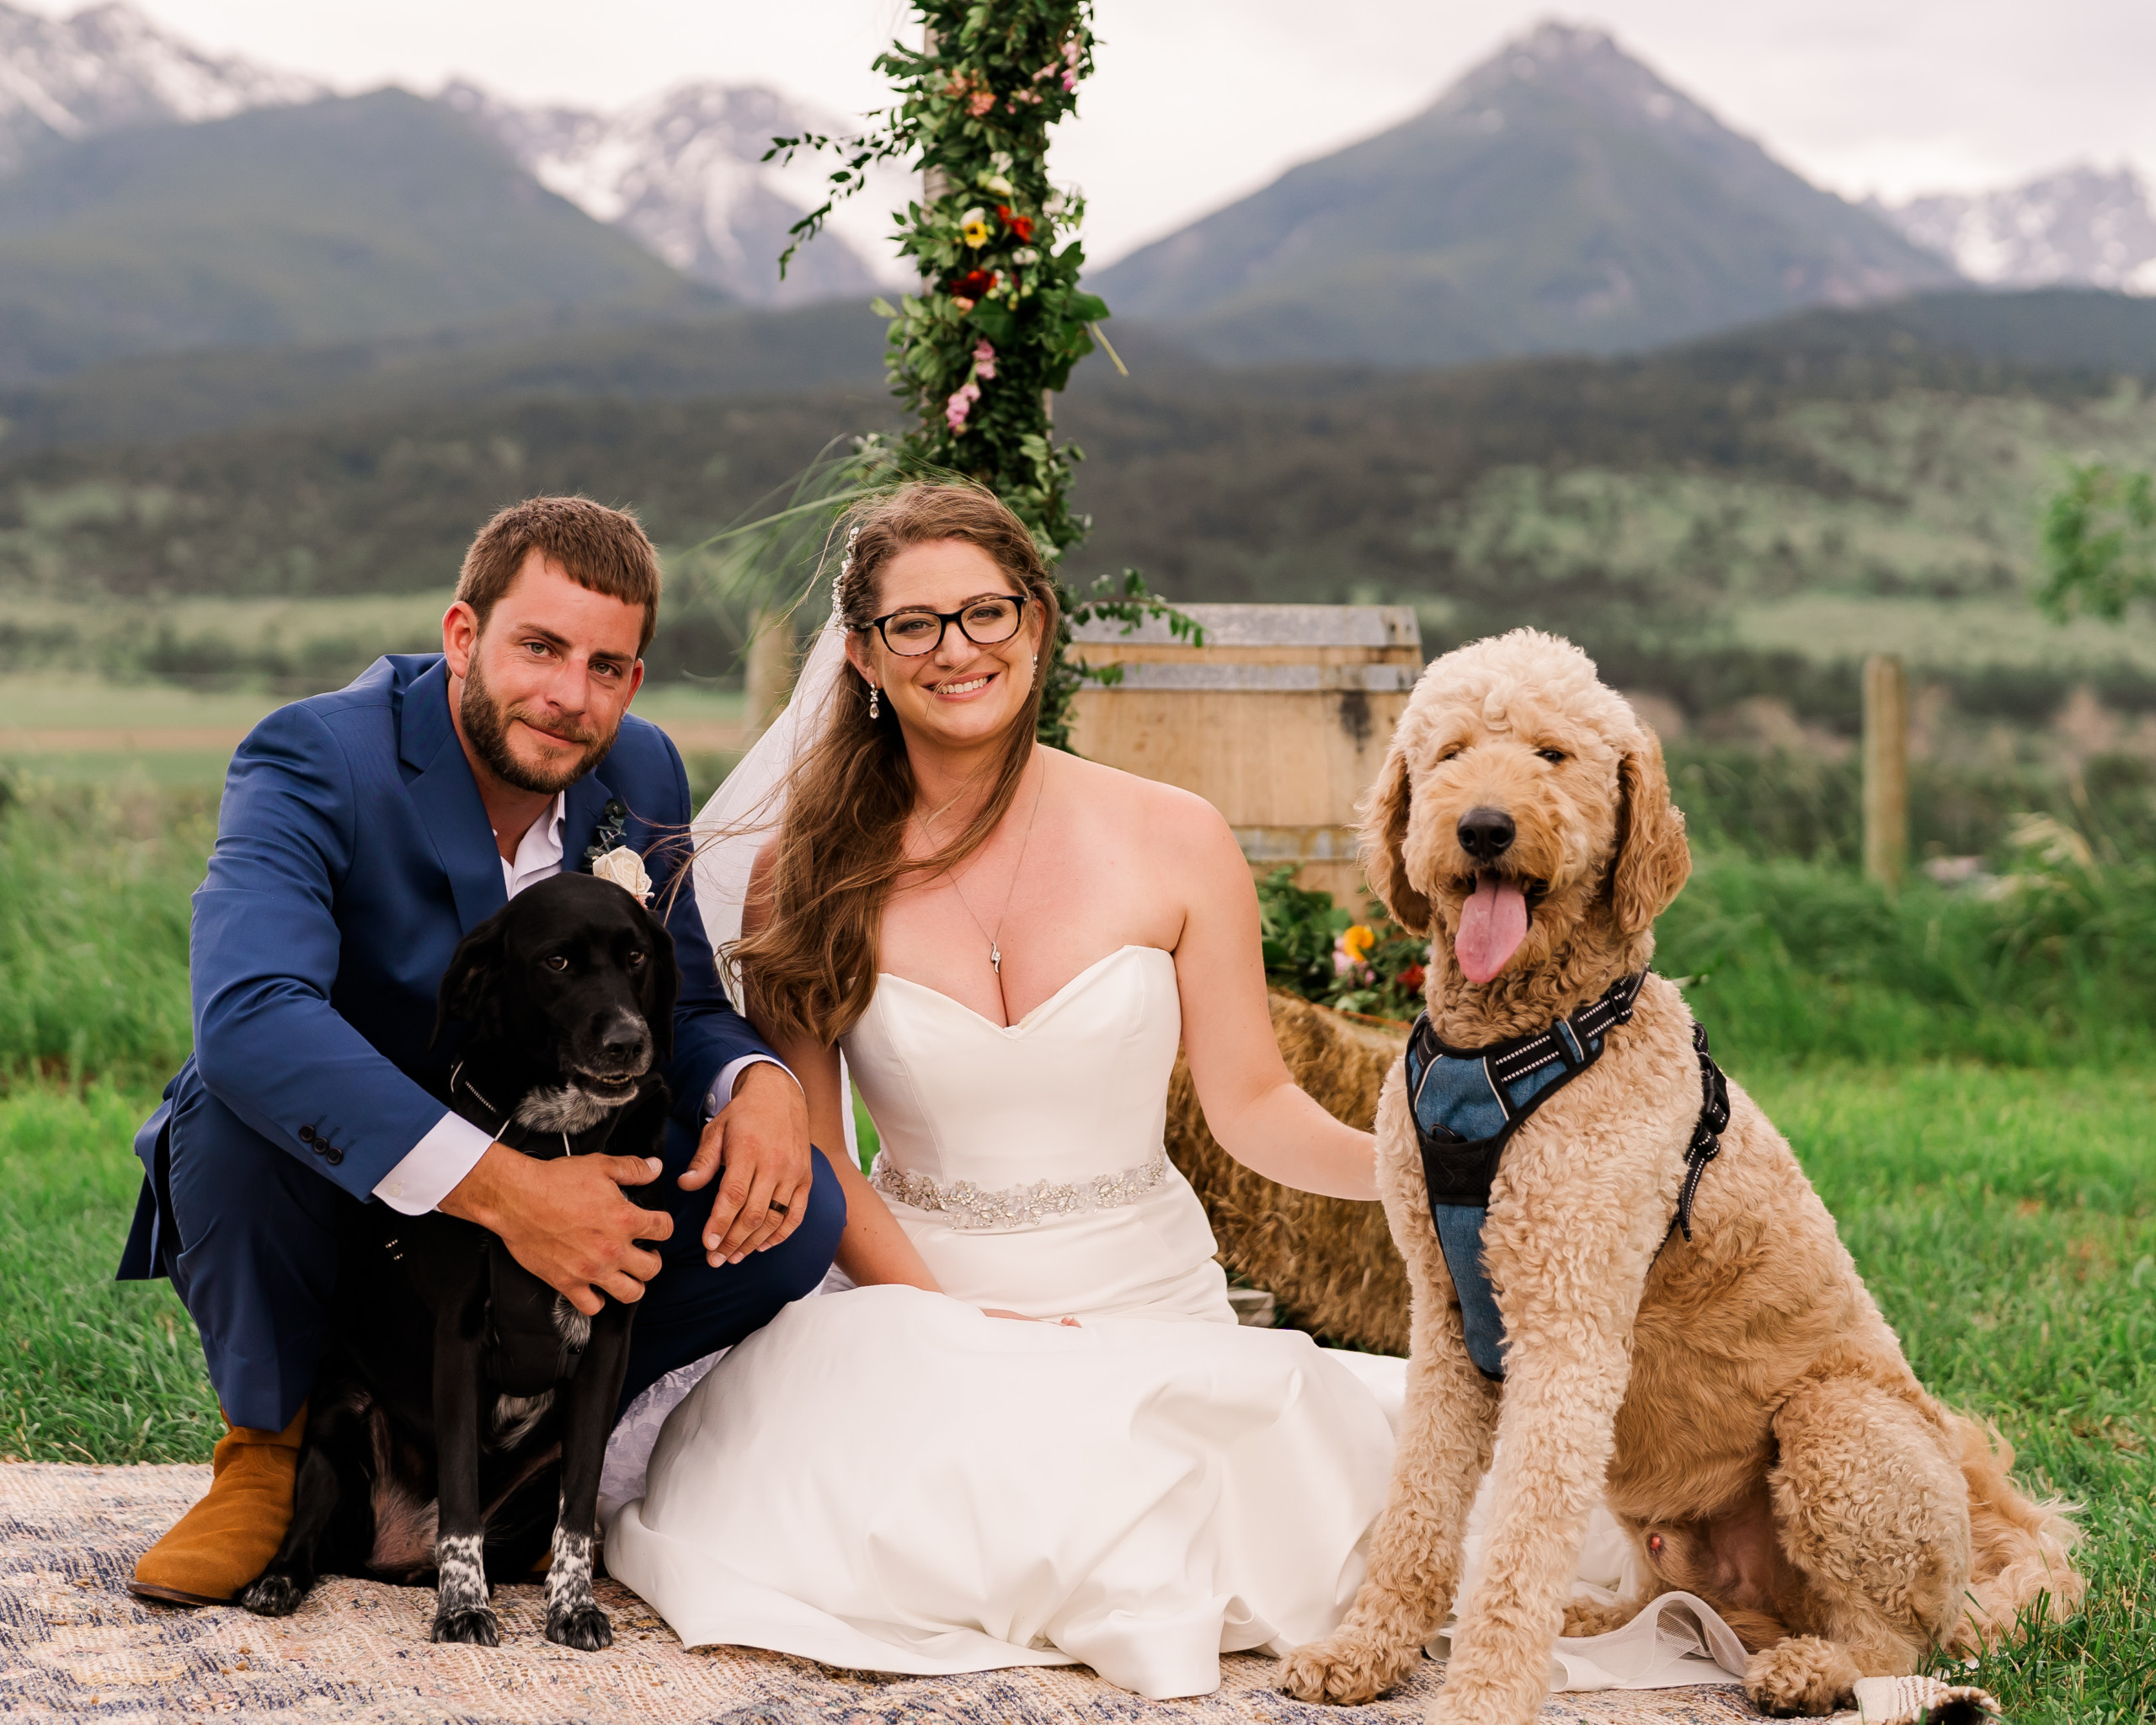 The Bride and Groom and Their Pups